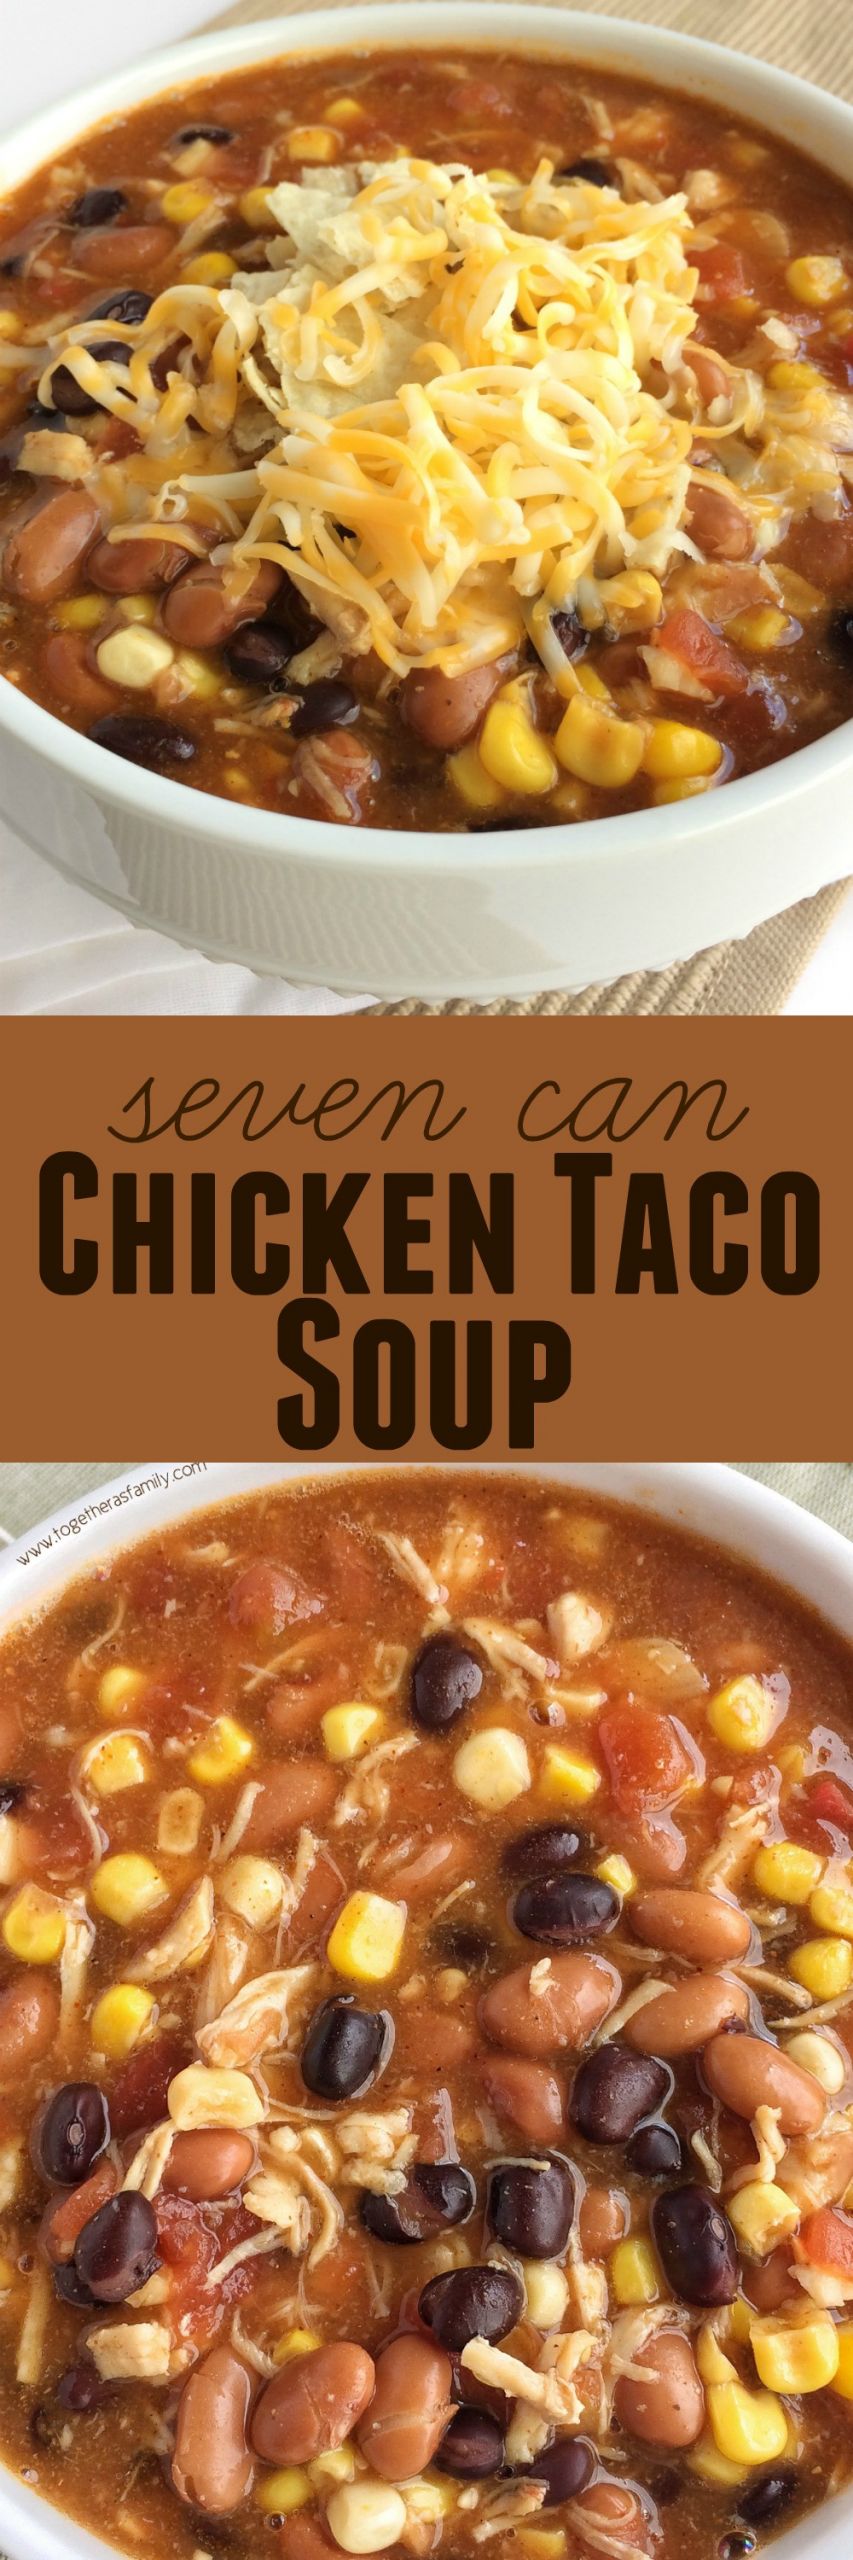 Chicken Taco Soup
 7 Can Chicken Taco Soup To her as Family